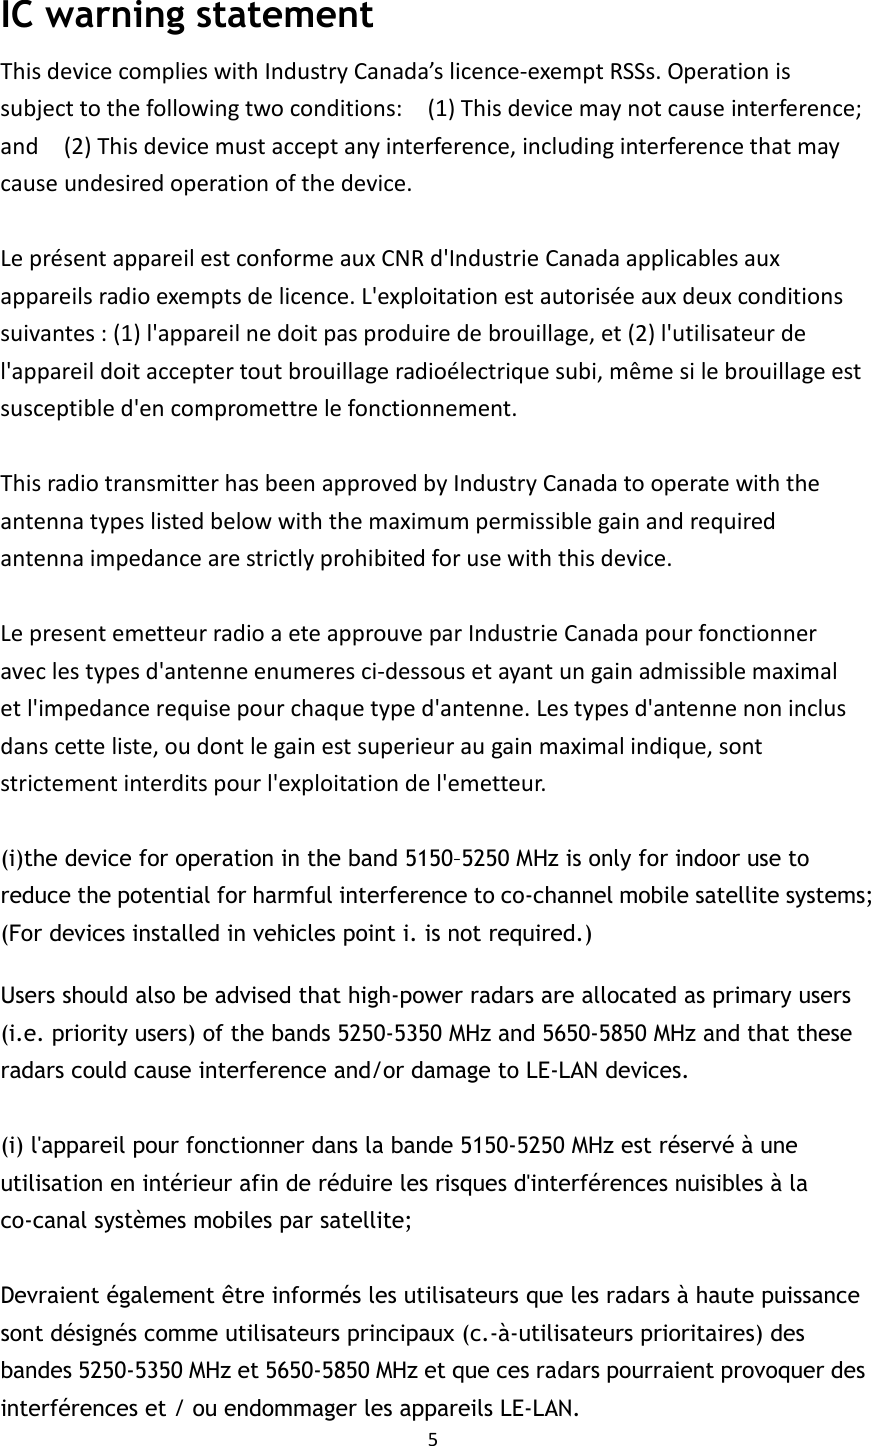 5  IC warning statement This device complies with Industry Canada’s licence-exempt RSSs. Operation is subject to the following two conditions:    (1) This device may not cause interference; and    (2) This device must accept any interference, including interference that may cause undesired operation of the device.  Le présent appareil est conforme aux CNR d&apos;Industrie Canada applicables aux appareils radio exempts de licence. L&apos;exploitation est autorisée aux deux conditions suivantes : (1) l&apos;appareil ne doit pas produire de brouillage, et (2) l&apos;utilisateur de l&apos;appareil doit accepter tout brouillage radioélectrique subi, même si le brouillage est susceptible d&apos;en compromettre le fonctionnement.  This radio transmitter has been approved by Industry Canada to operate with the antenna types listed below with the maximum permissible gain and required antenna impedance are strictly prohibited for use with this device.  Le present emetteur radio a ete approuve par Industrie Canada pour fonctionner avec les types d&apos;antenne enumeres ci-dessous et ayant un gain admissible maximal et l&apos;impedance requise pour chaque type d&apos;antenne. Les types d&apos;antenne non inclus dans cette liste, ou dont le gain est superieur au gain maximal indique, sont strictement interdits pour l&apos;exploitation de l&apos;emetteur.  (i)the device for operation in the band 5150–5250 MHz is only for indoor use to reduce the potential for harmful interference to co-channel mobile satellite systems; (For devices installed in vehicles point i. is not required.)  Users should also be advised that high-power radars are allocated as primary users (i.e. priority users) of the bands 5250-5350 MHz and 5650-5850 MHz and that these radars could cause interference and/or damage to LE-LAN devices.    (i) l&apos;appareil pour fonctionner dans la bande 5150-5250 MHz est réservé à une utilisation en intérieur afin de réduire les risques d&apos;interférences nuisibles à la co-canal systèmes mobiles par satellite;  Devraient également être informés les utilisateurs que les radars à haute puissance sont désignés comme utilisateurs principaux (c.-à-utilisateurs prioritaires) des bandes 5250-5350 MHz et 5650-5850 MHz et que ces radars pourraient provoquer des interférences et / ou endommager les appareils LE-LAN. 